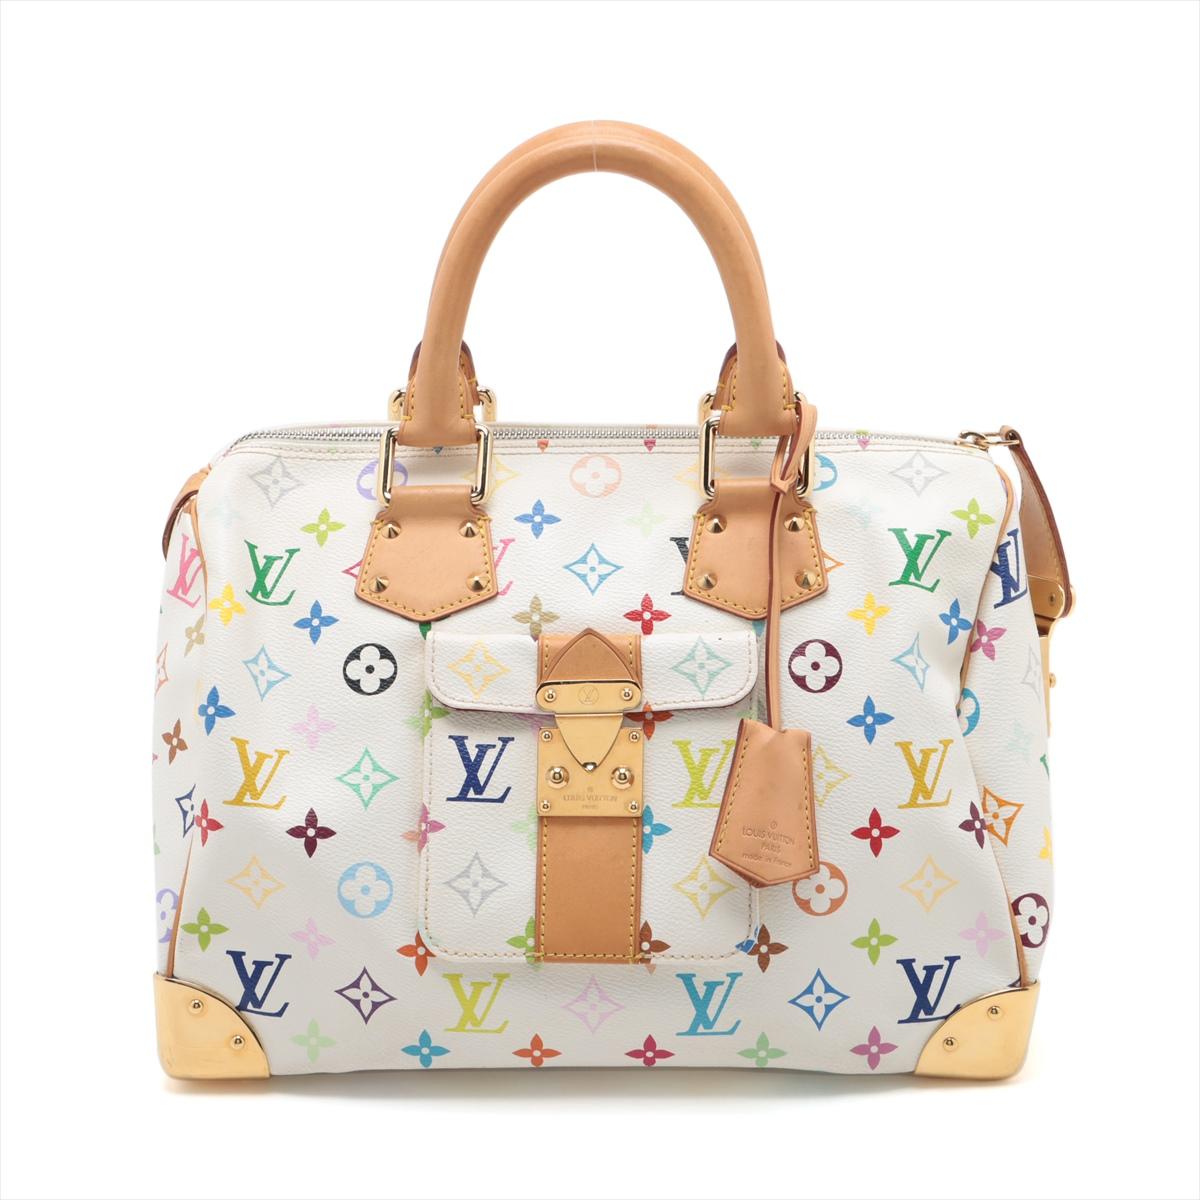 The Louis Vuitton Multicolor Speedy 30 in White is a dazzling and iconic handbag that seamlessly blends luxury and contemporary flair. Crafted from the brand's distinctive Monogram Multicolore canvas, the bag features a striking combination of